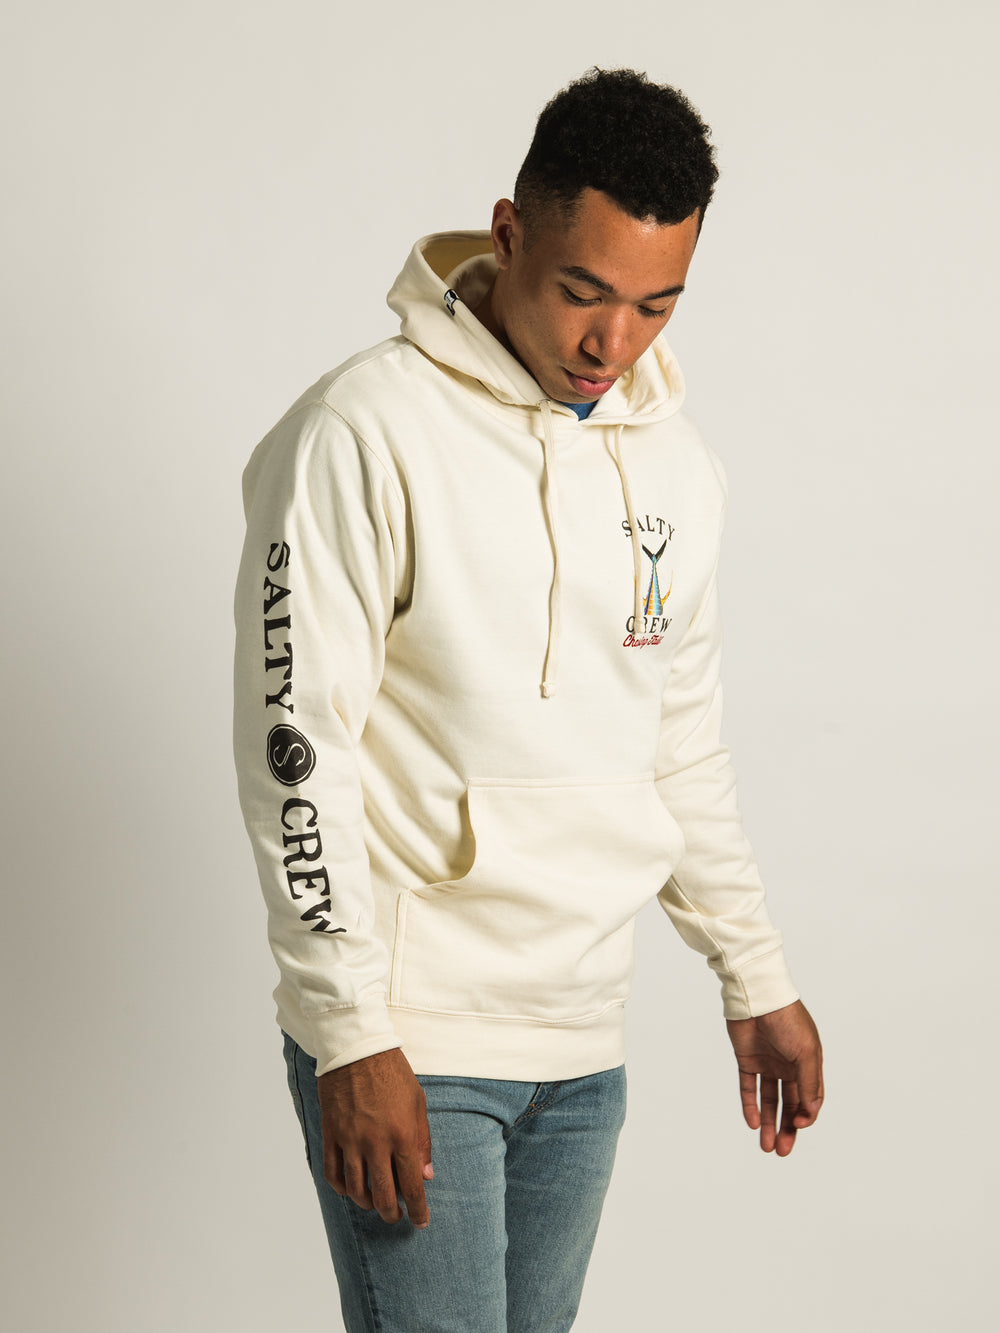 SALTY CREW TAILED PULLOVER HOODIE  - CLEARANCE